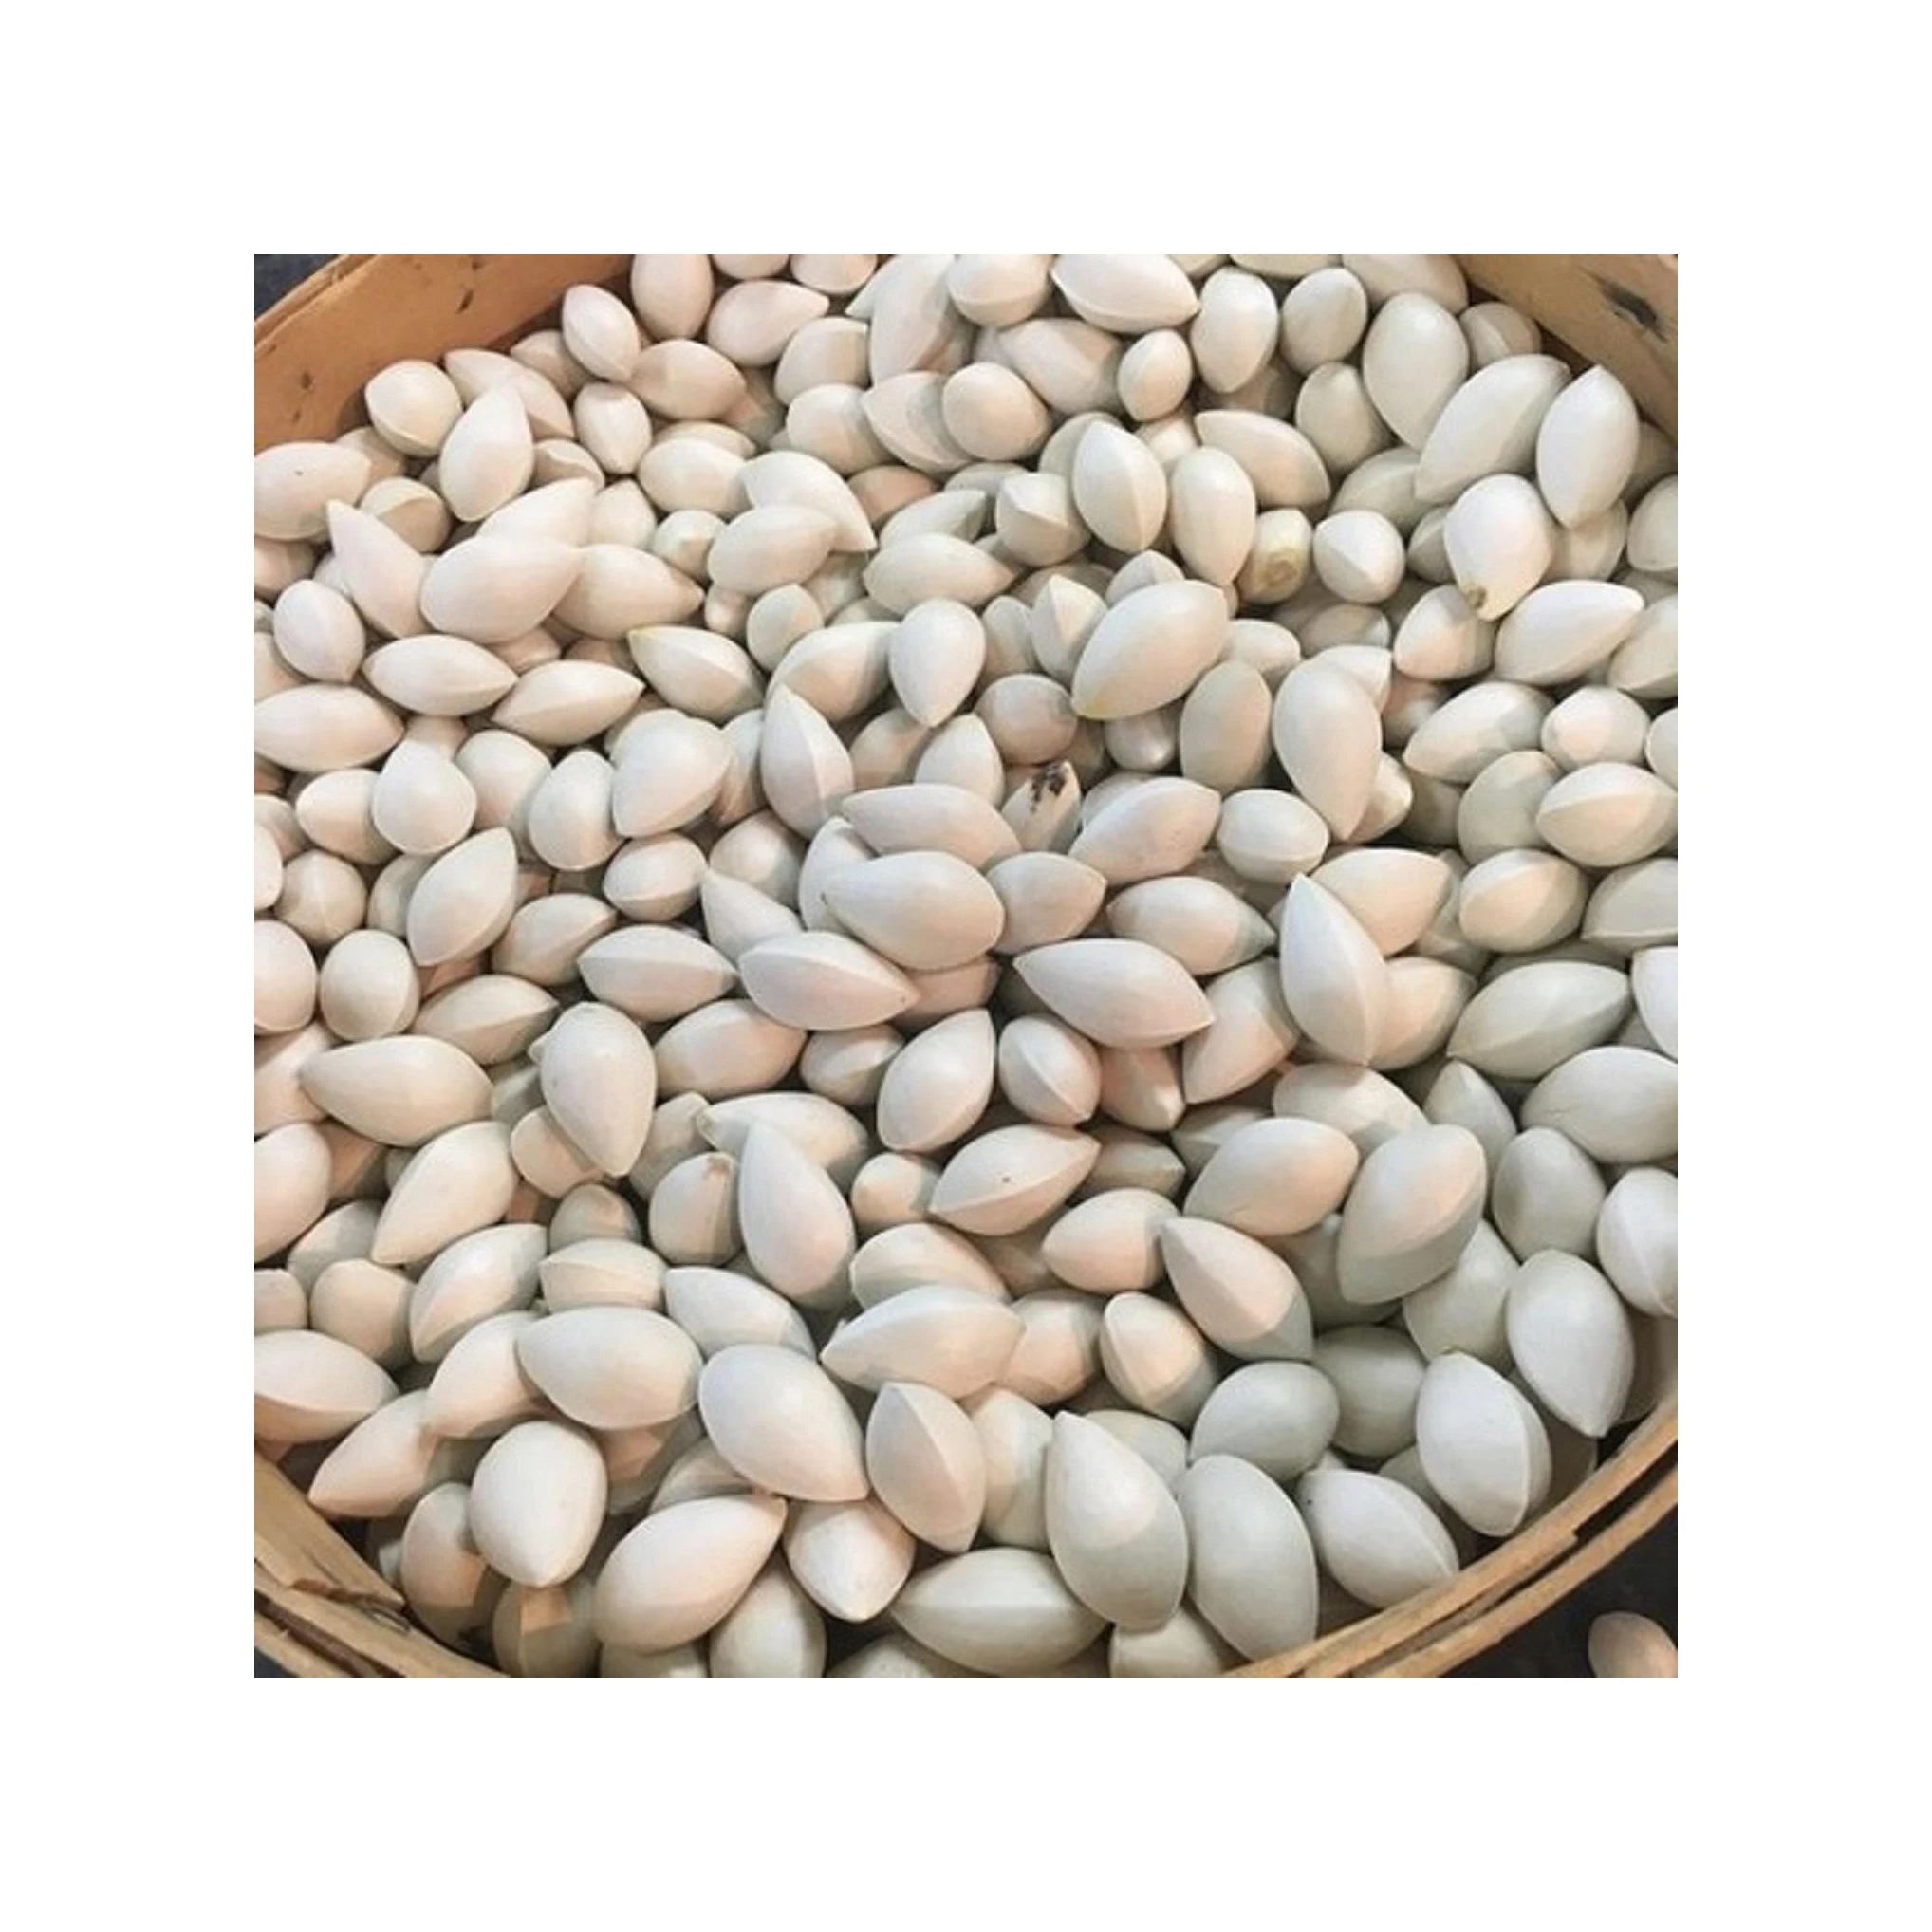 Hot Selling Price Of Raw Ginkgo Nuts Available in Bulk Quantity